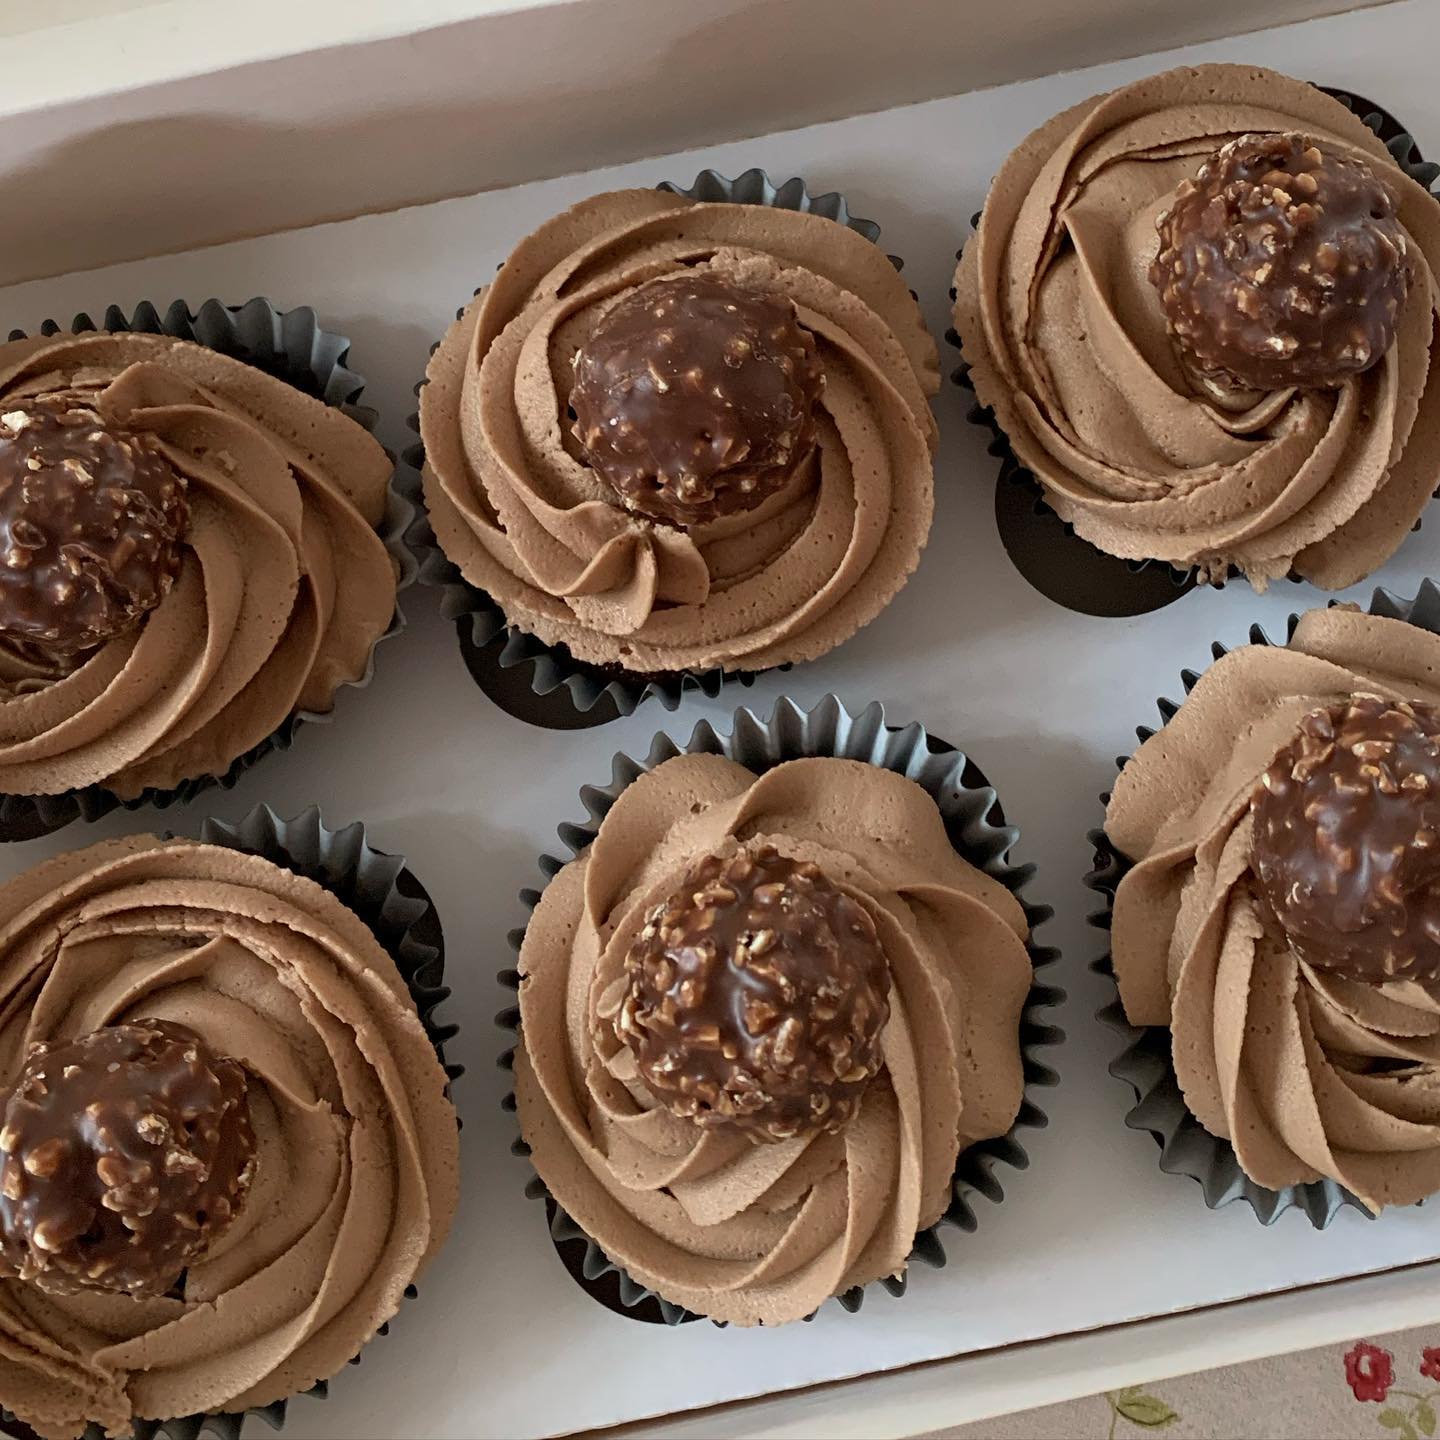 Cupcakes with chocolate frosting and ferrero rocher on top